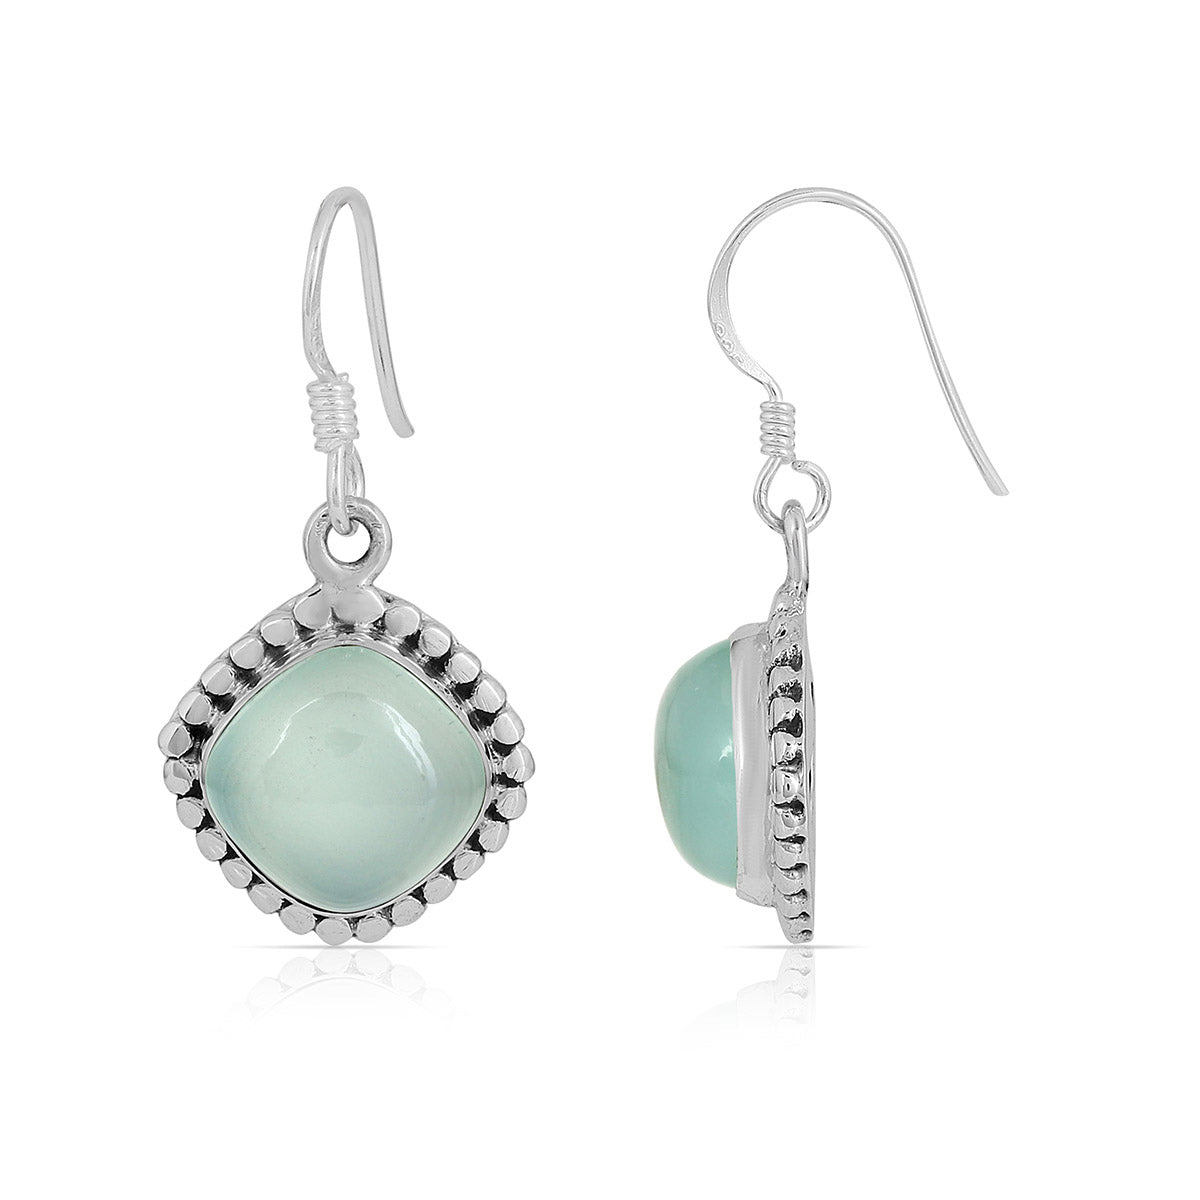 Details about   Womens Aqua Chalcedony Gemstone Dangle Earring 925 Sterling Silver Jewelry 